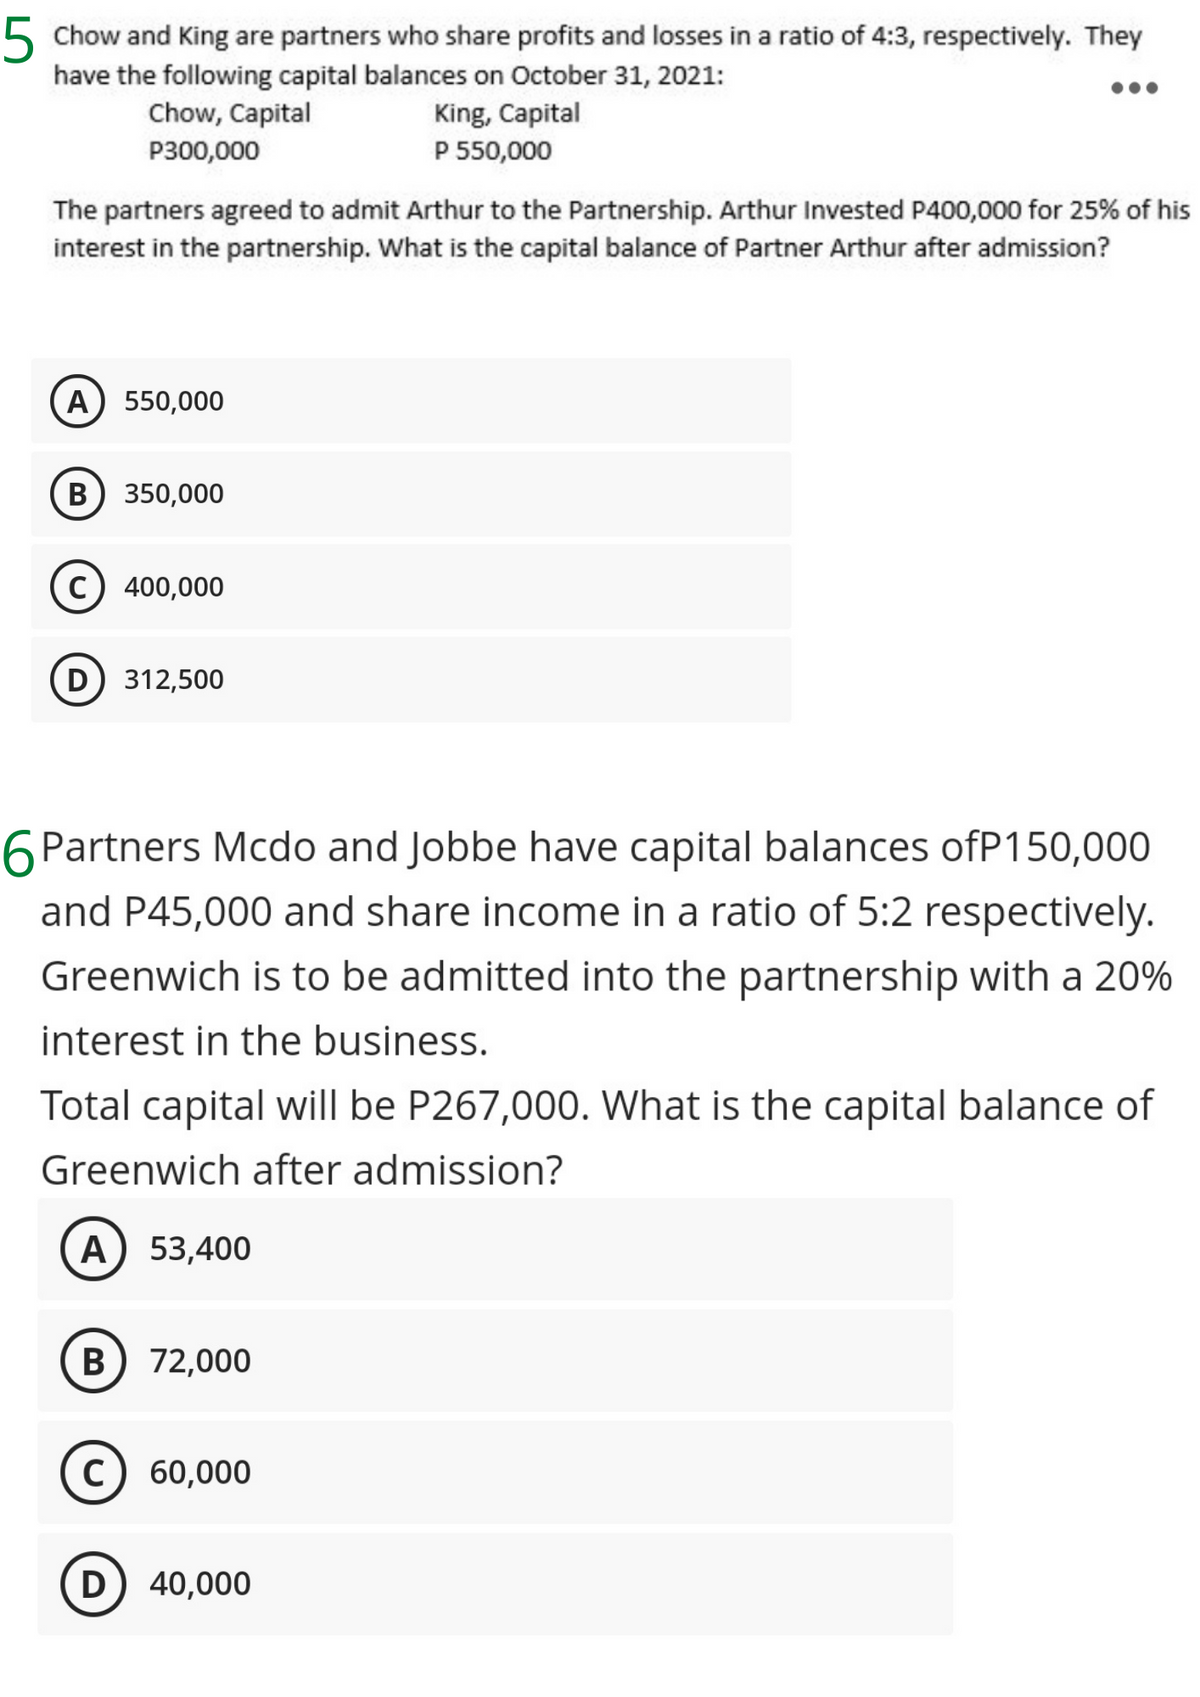 5 Chow and King are partners who share profits and losses in a ratio of 4:3, respectively. They
have the following capital balances on October 31, 2021:
Chow, Capital
King, Capital
P 550,000
P300,000
The partners agreed to admit Arthur to the Partnership. Arthur Invested P400,000 for 25% of his
interest in the partnership. What is the capital balance of Partner Arthur after admission?
A) 550,000
350,000
C
400,000
D) 312,500
6 Partners Mcdo and Jobbe have capital balances ofP150,000
and P45,000 and share income in a ratio of 5:2 respectively.
Greenwich is to be admitted into the partnership with a 20%
interest in the business.
Total capital will be P267,000. What is the capital balance of
Greenwich after admission?
A 53,400
B) 72,000
C) 60,000
D) 40,000
